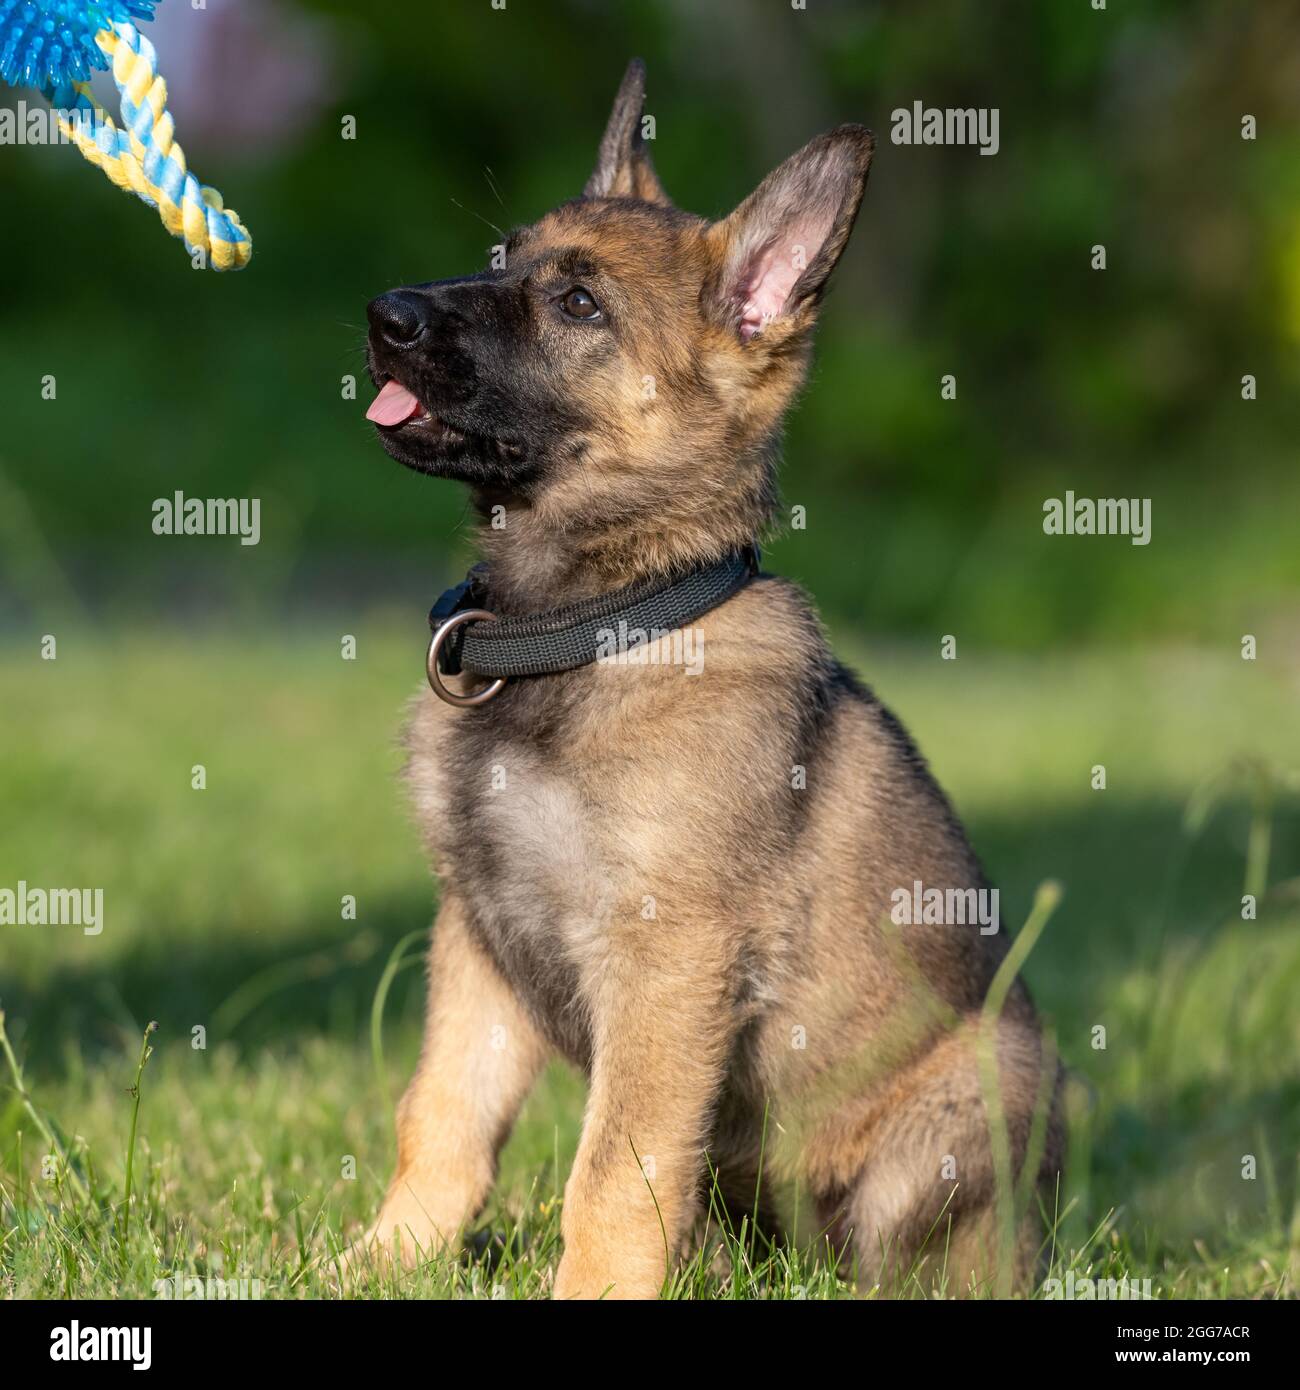 dog portrait of an eight weeks old german shepherd puppy with a green grass background sable colored working line breed 2GG7ACR